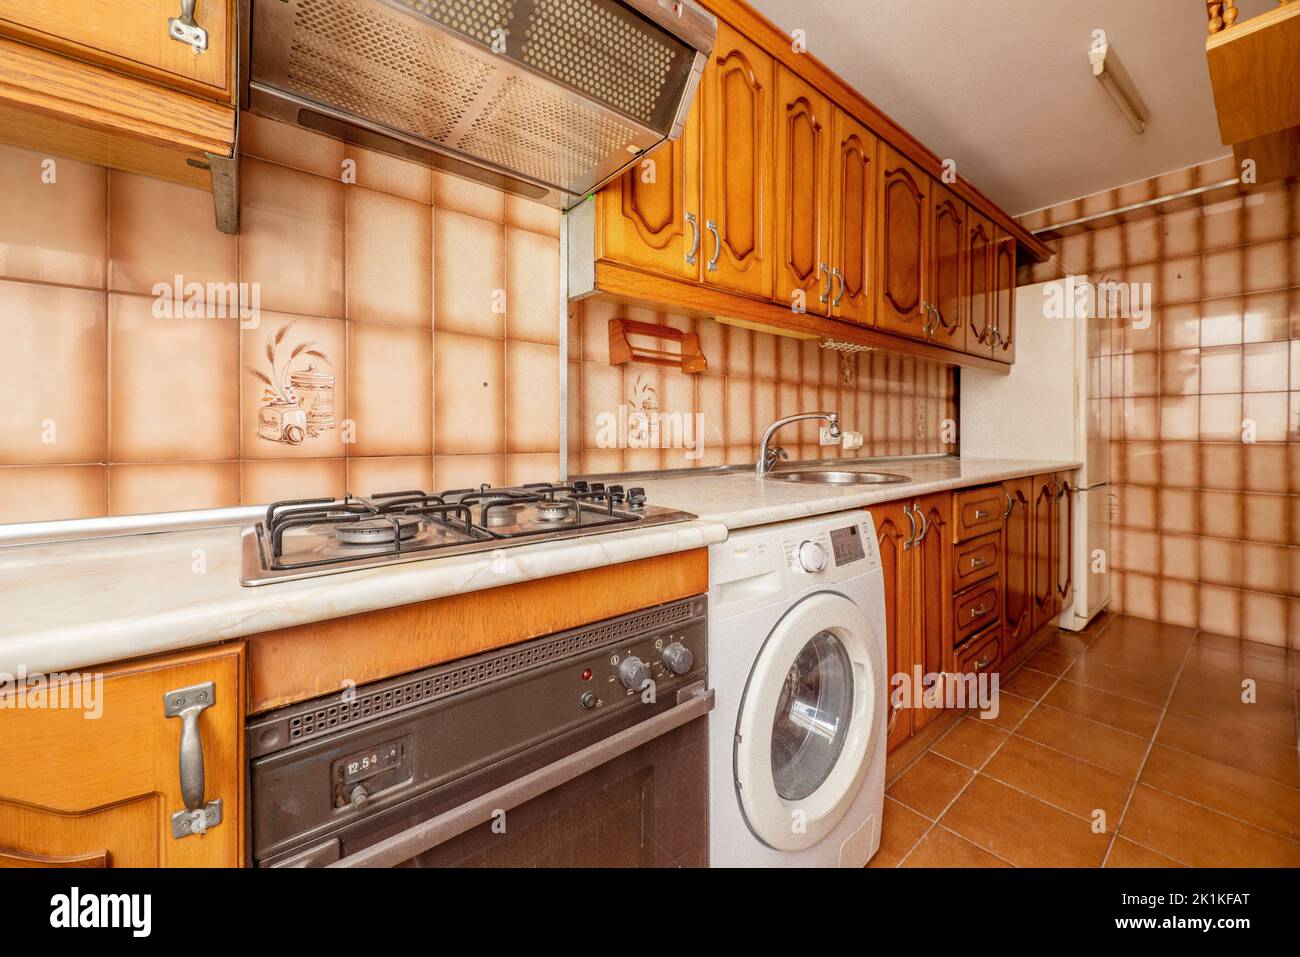 Kitchen with cream-colored imitation marble wood countertops and orange-brown tiles with rustic wood cabinets and integrated appliances Stock Photo